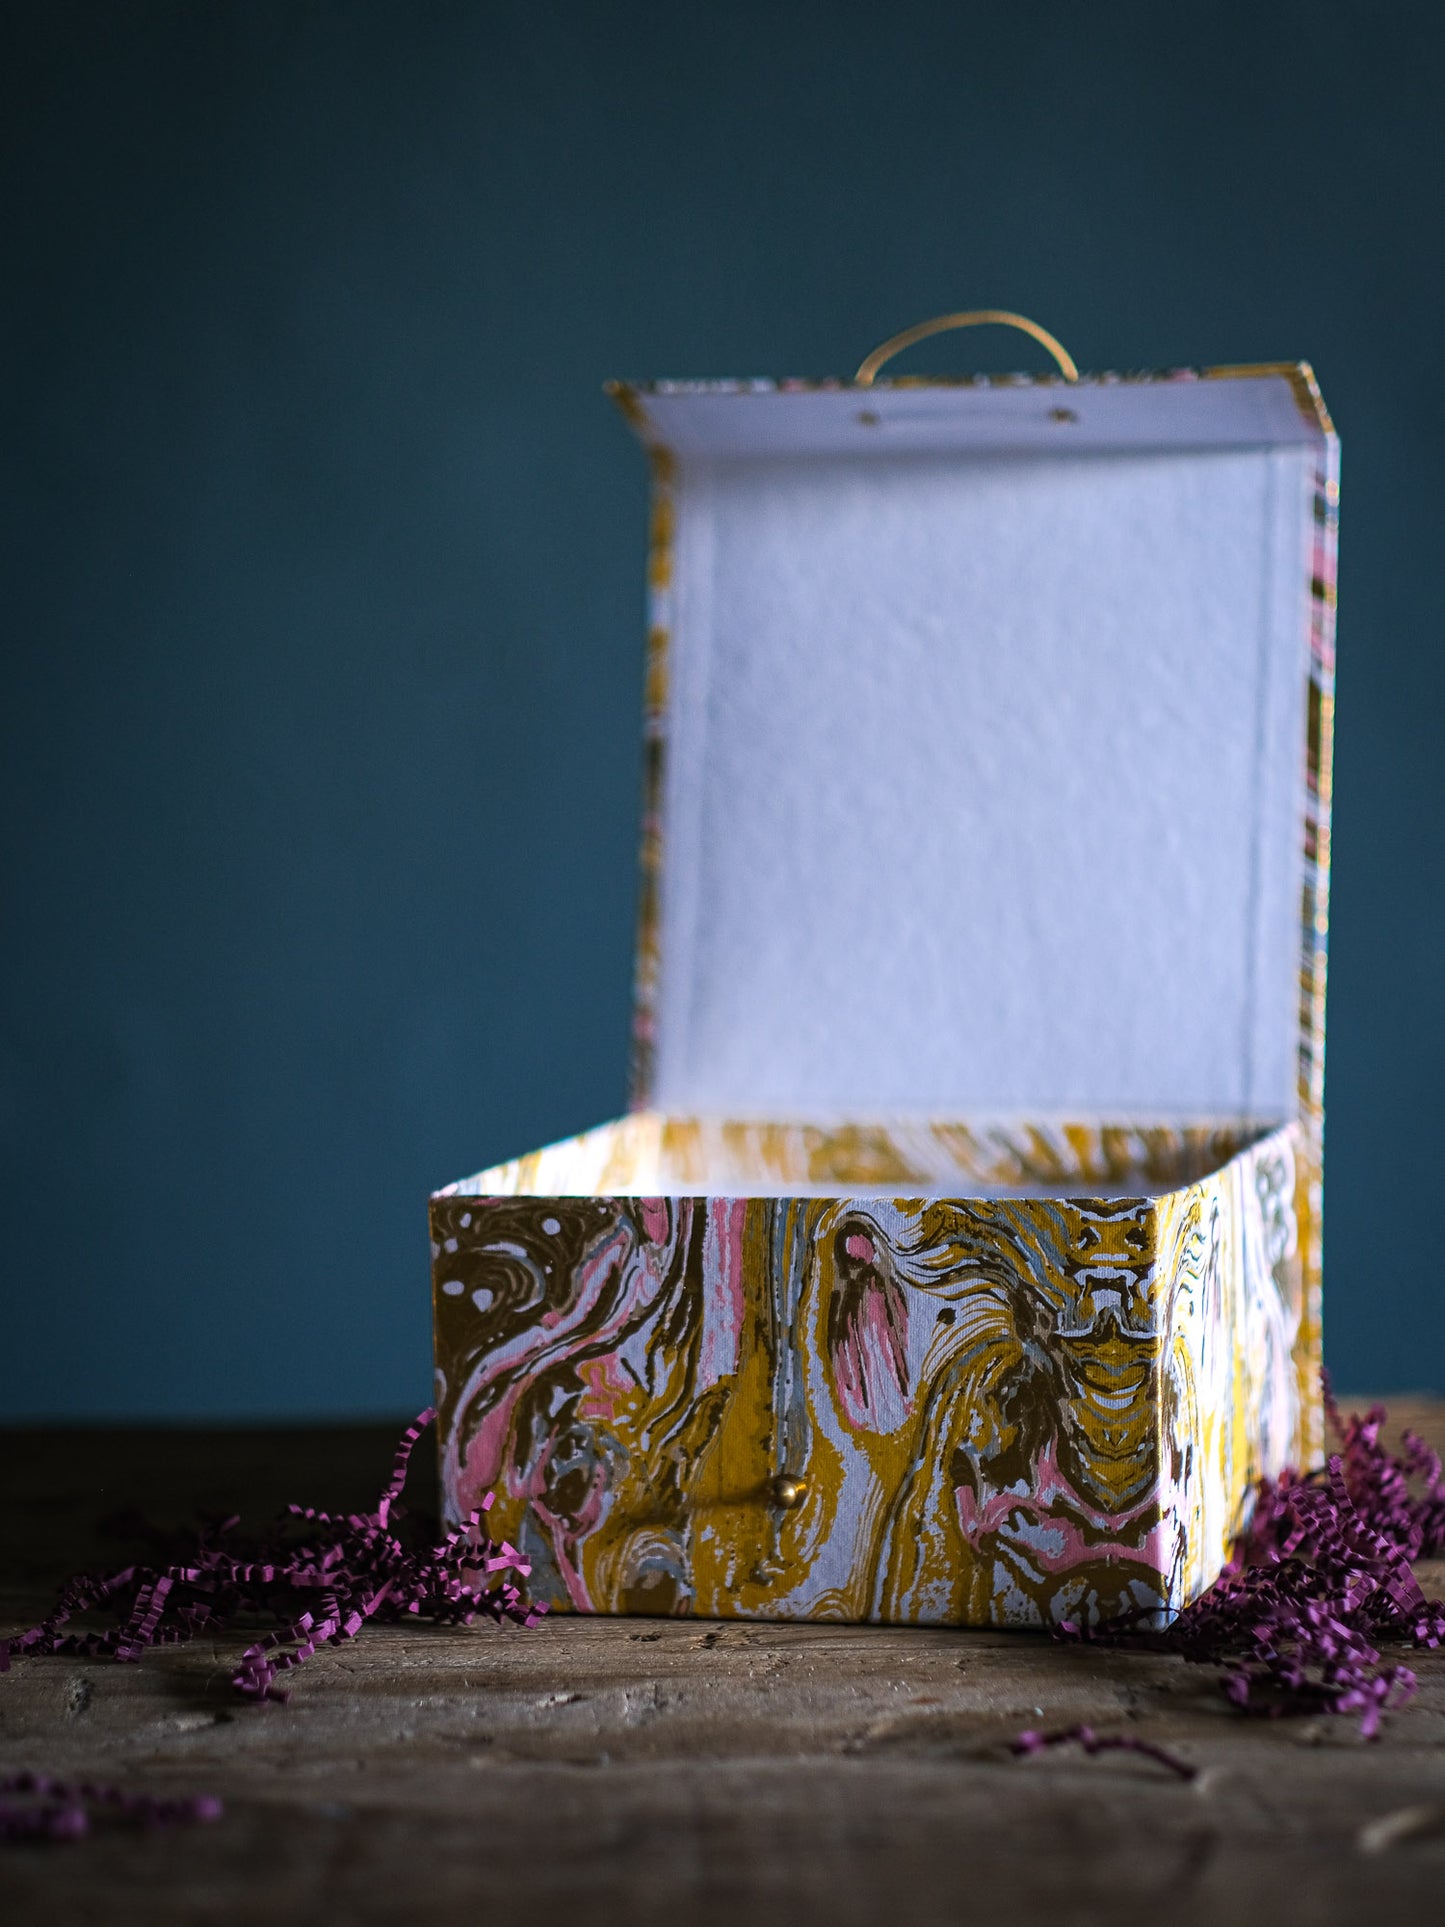 Handmade Recycled Marbled Paper Boxes